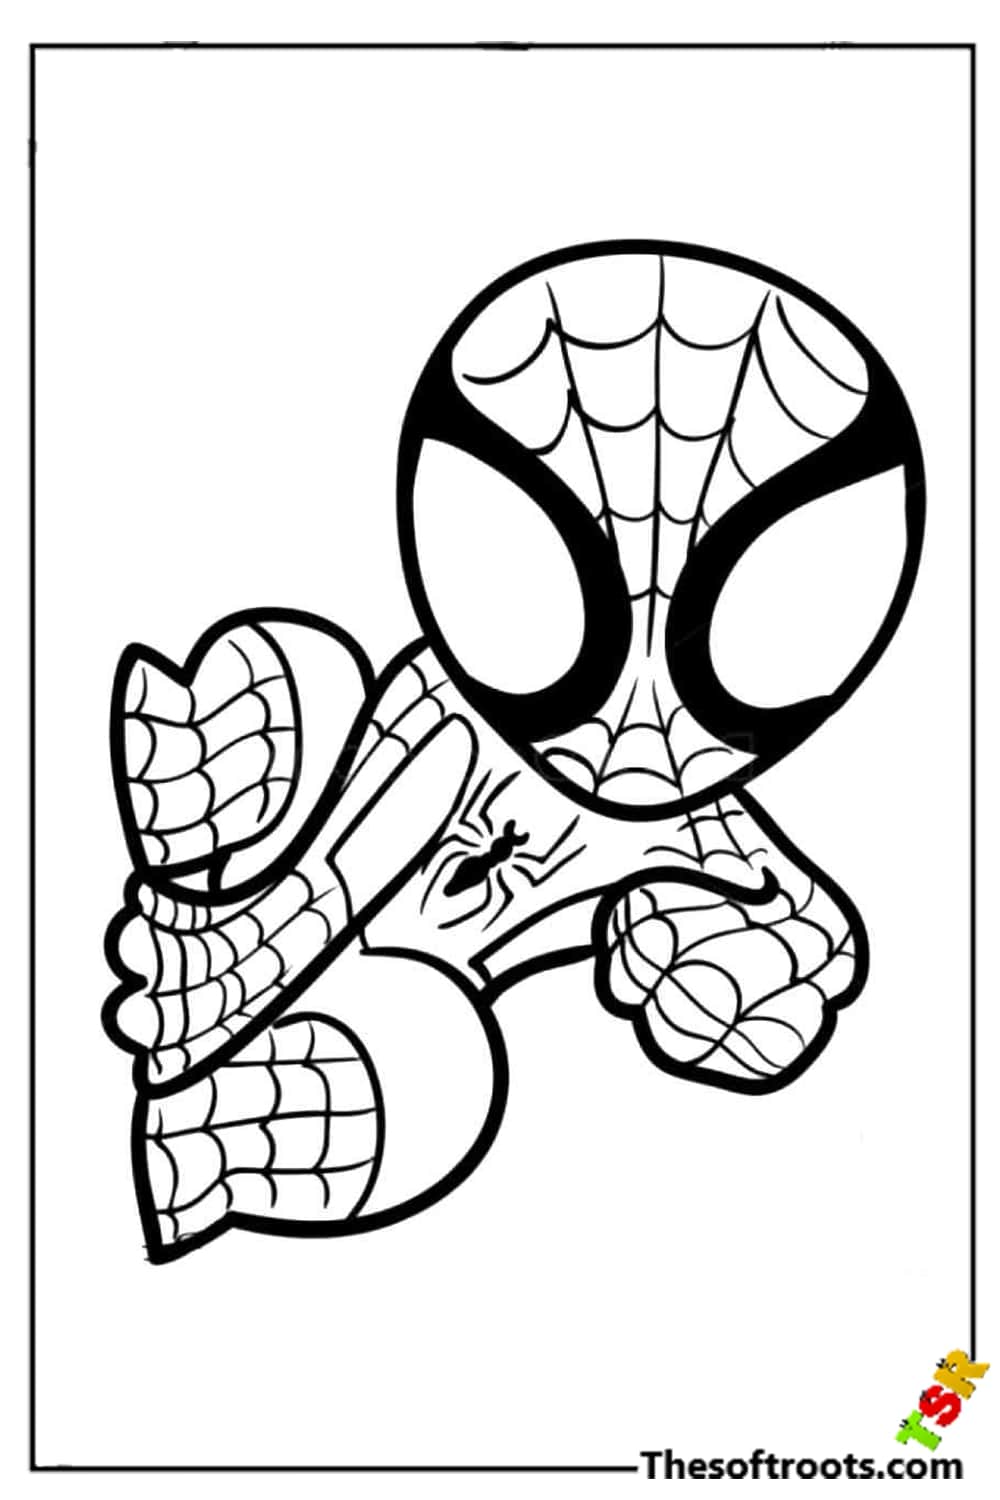 Funny Spiderman coloring pages